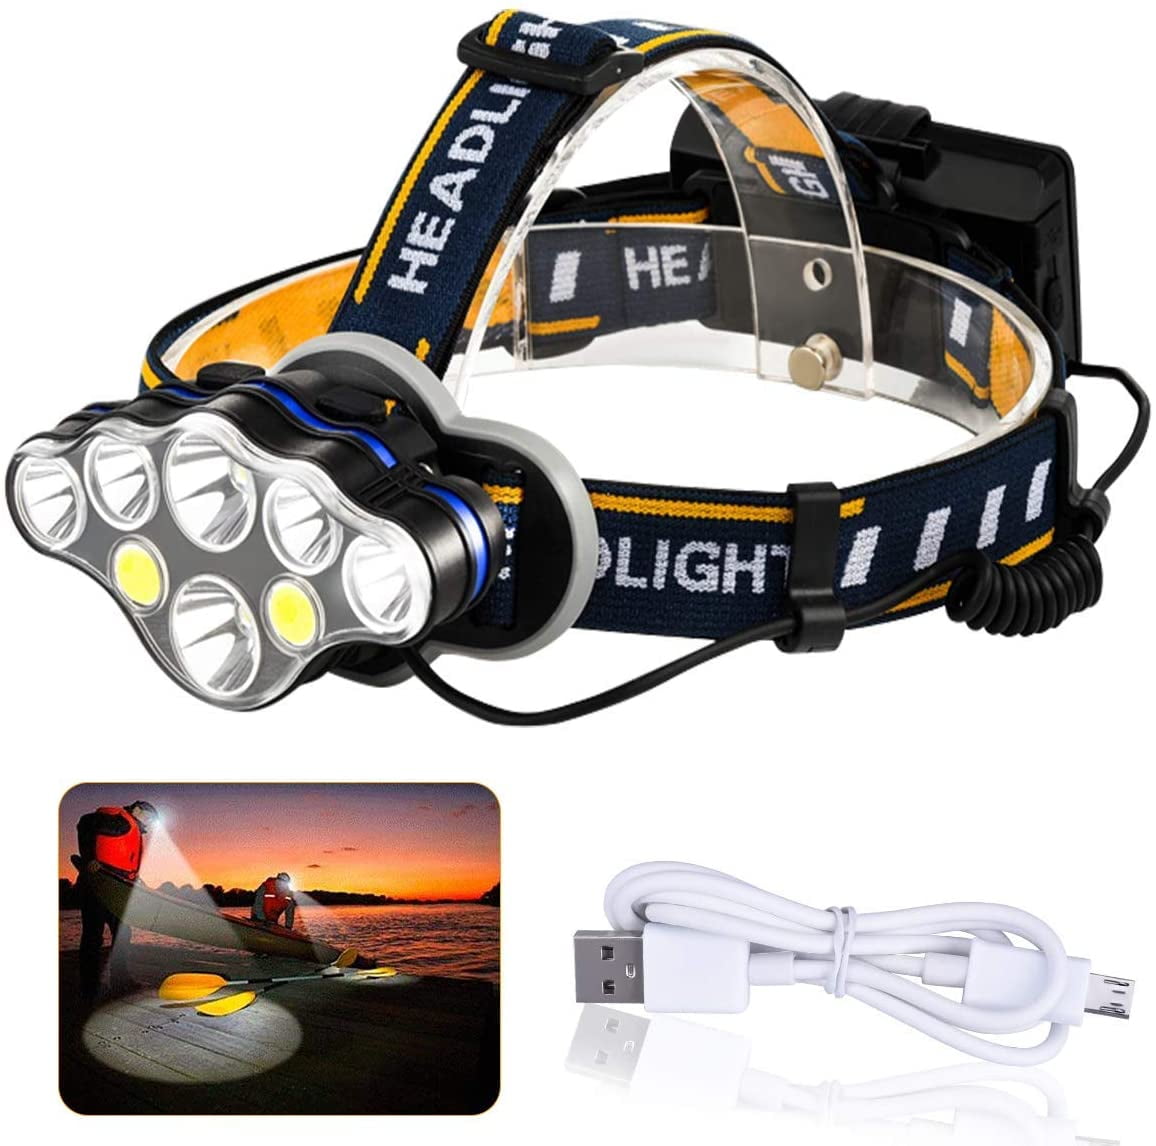 Headlamp,Brightest 18000 Lumen 8 LED 8 Modes Headlight with Red Warning Lihgt,USB Rechargeable Waterproof Headlight Flashlight,Super Bright Headlamp Flashlight for Camping,Fishing,Cellar,Outdoors 